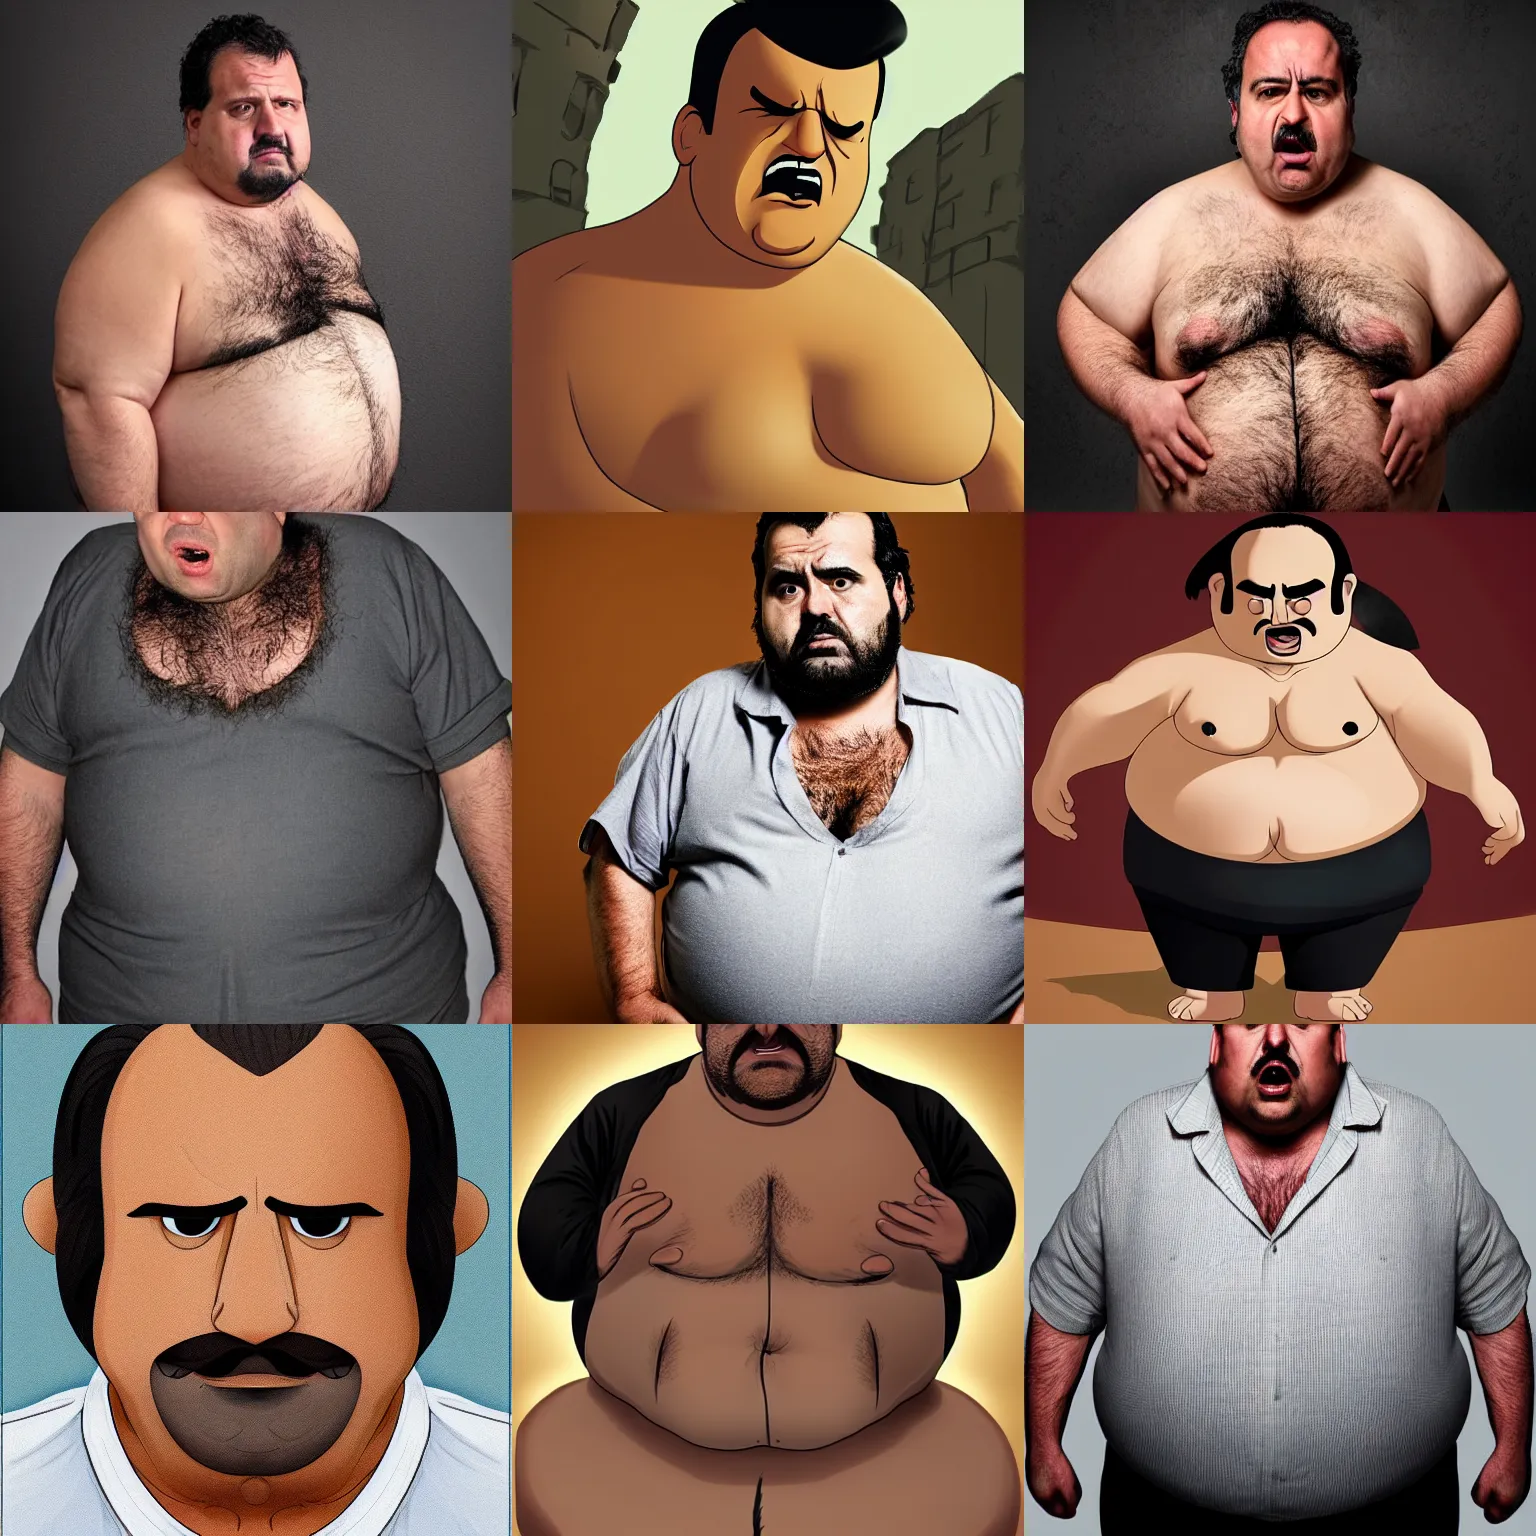 Prompt: character portrait : obese man with olive skin. black hair, balding with a comb over. light shirt unbuttoned. extremely hairy chest. greek. angry.